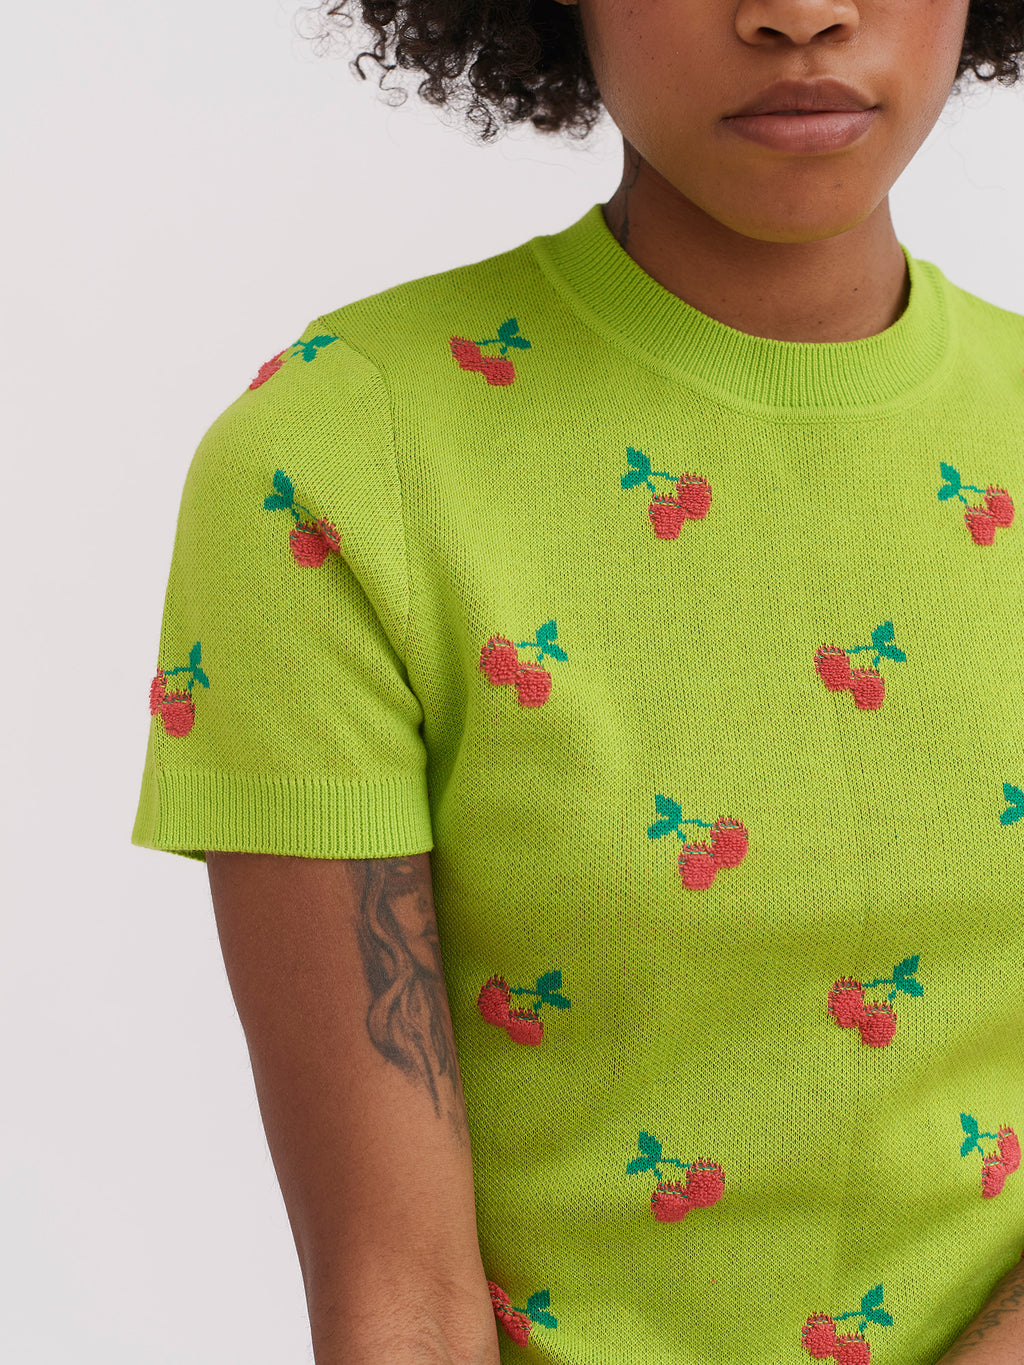 Lazy Oaf Cherry Picked Knitted Tee